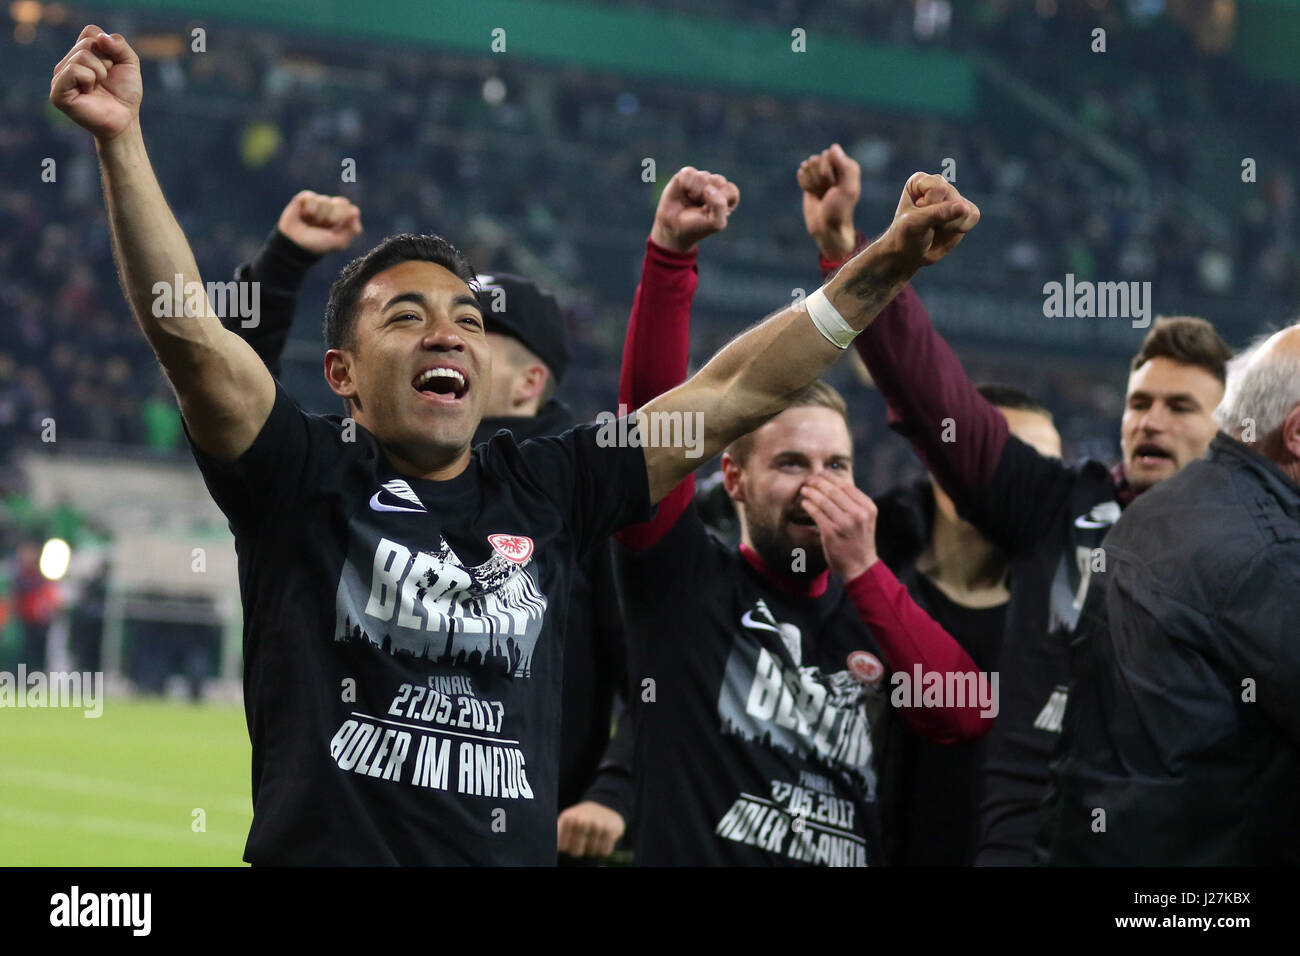 Moenchengladbach, Germany. 25th Apr, 2017. Frankfurt's Marco Fabian (l) and the team celebrate the victory after the penalty shootout at the DFB Cup semi-final match between Borussia Moenchengladbach and Eintracht Frankfurt in the Borussia Park stadium in Moenchengladbach, Germany, 25 April 2017. Photo: Ina Fassbender/dpa/Alamy Live News Stock Photo